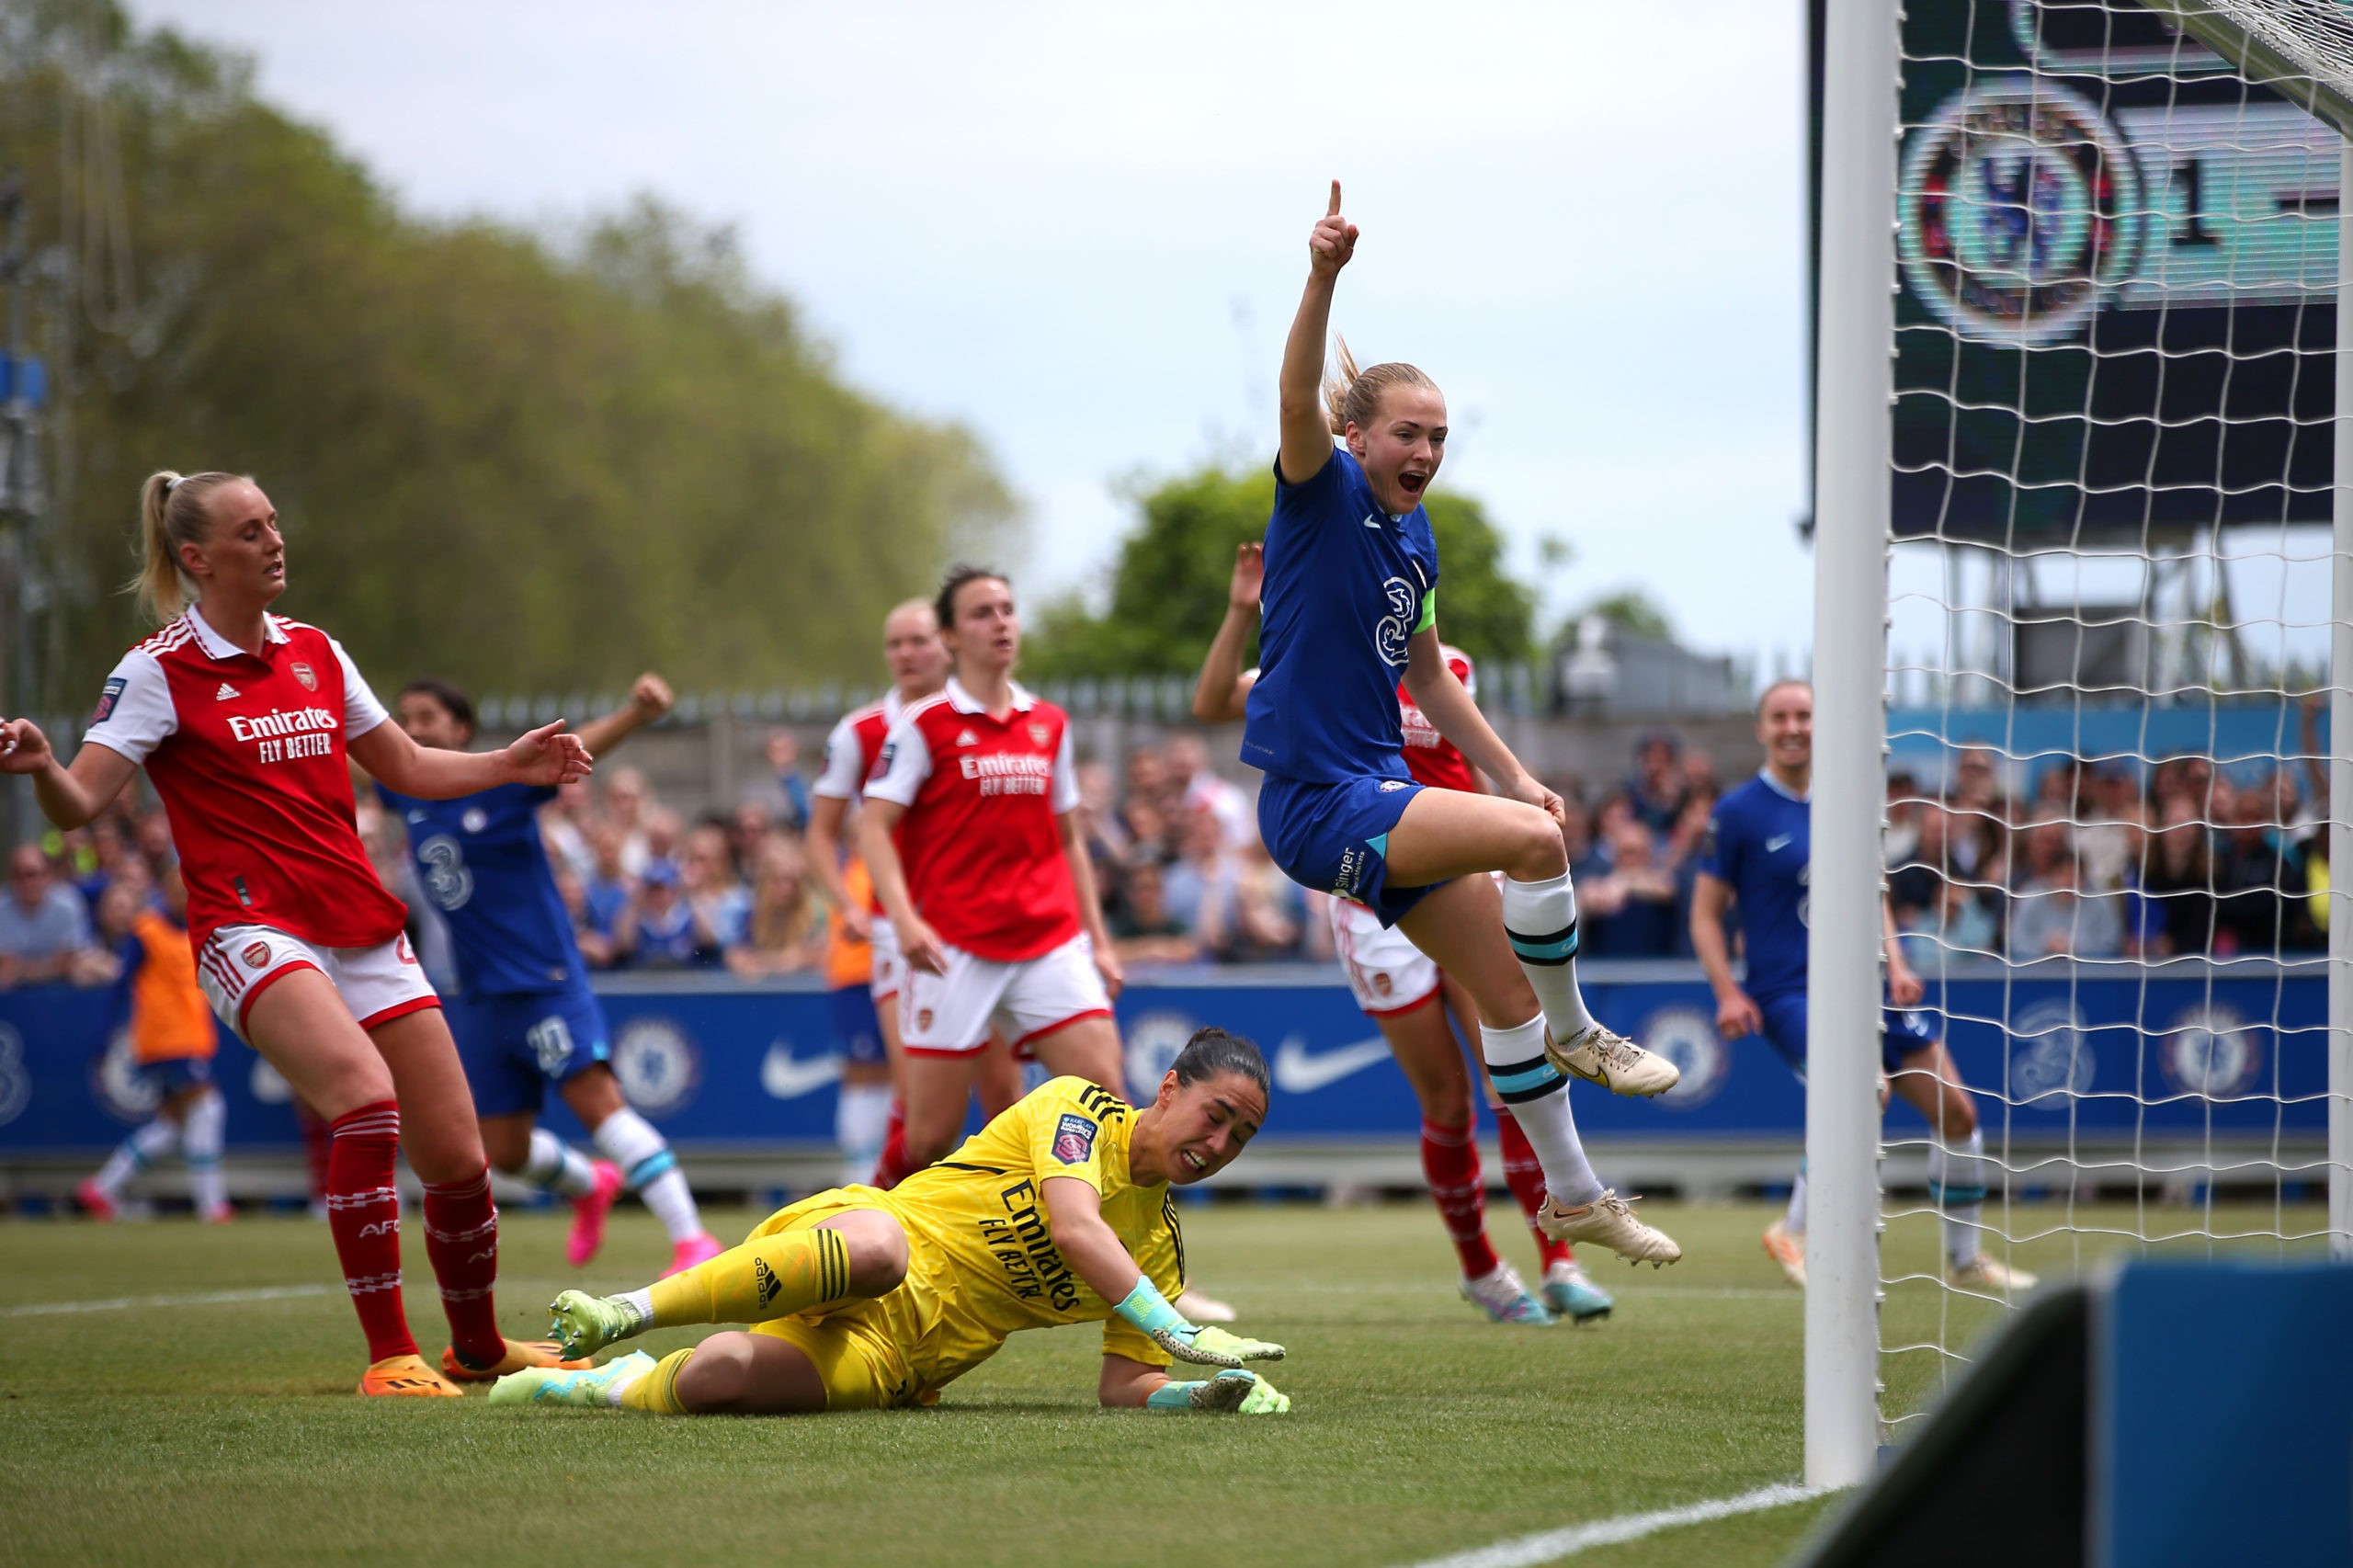 KINGSTON UPON THAMES, ENGLAND - MAY 21: Magdalena Eriksson of Chelsea celebrates after scoring the team's second goal during the FA Women's Super League match between Chelsea and Arsenal at Kingsmeadow on May 21, 2023 in Kingston upon Thames, England. (Photo by Steve Bardens/Getty Images)